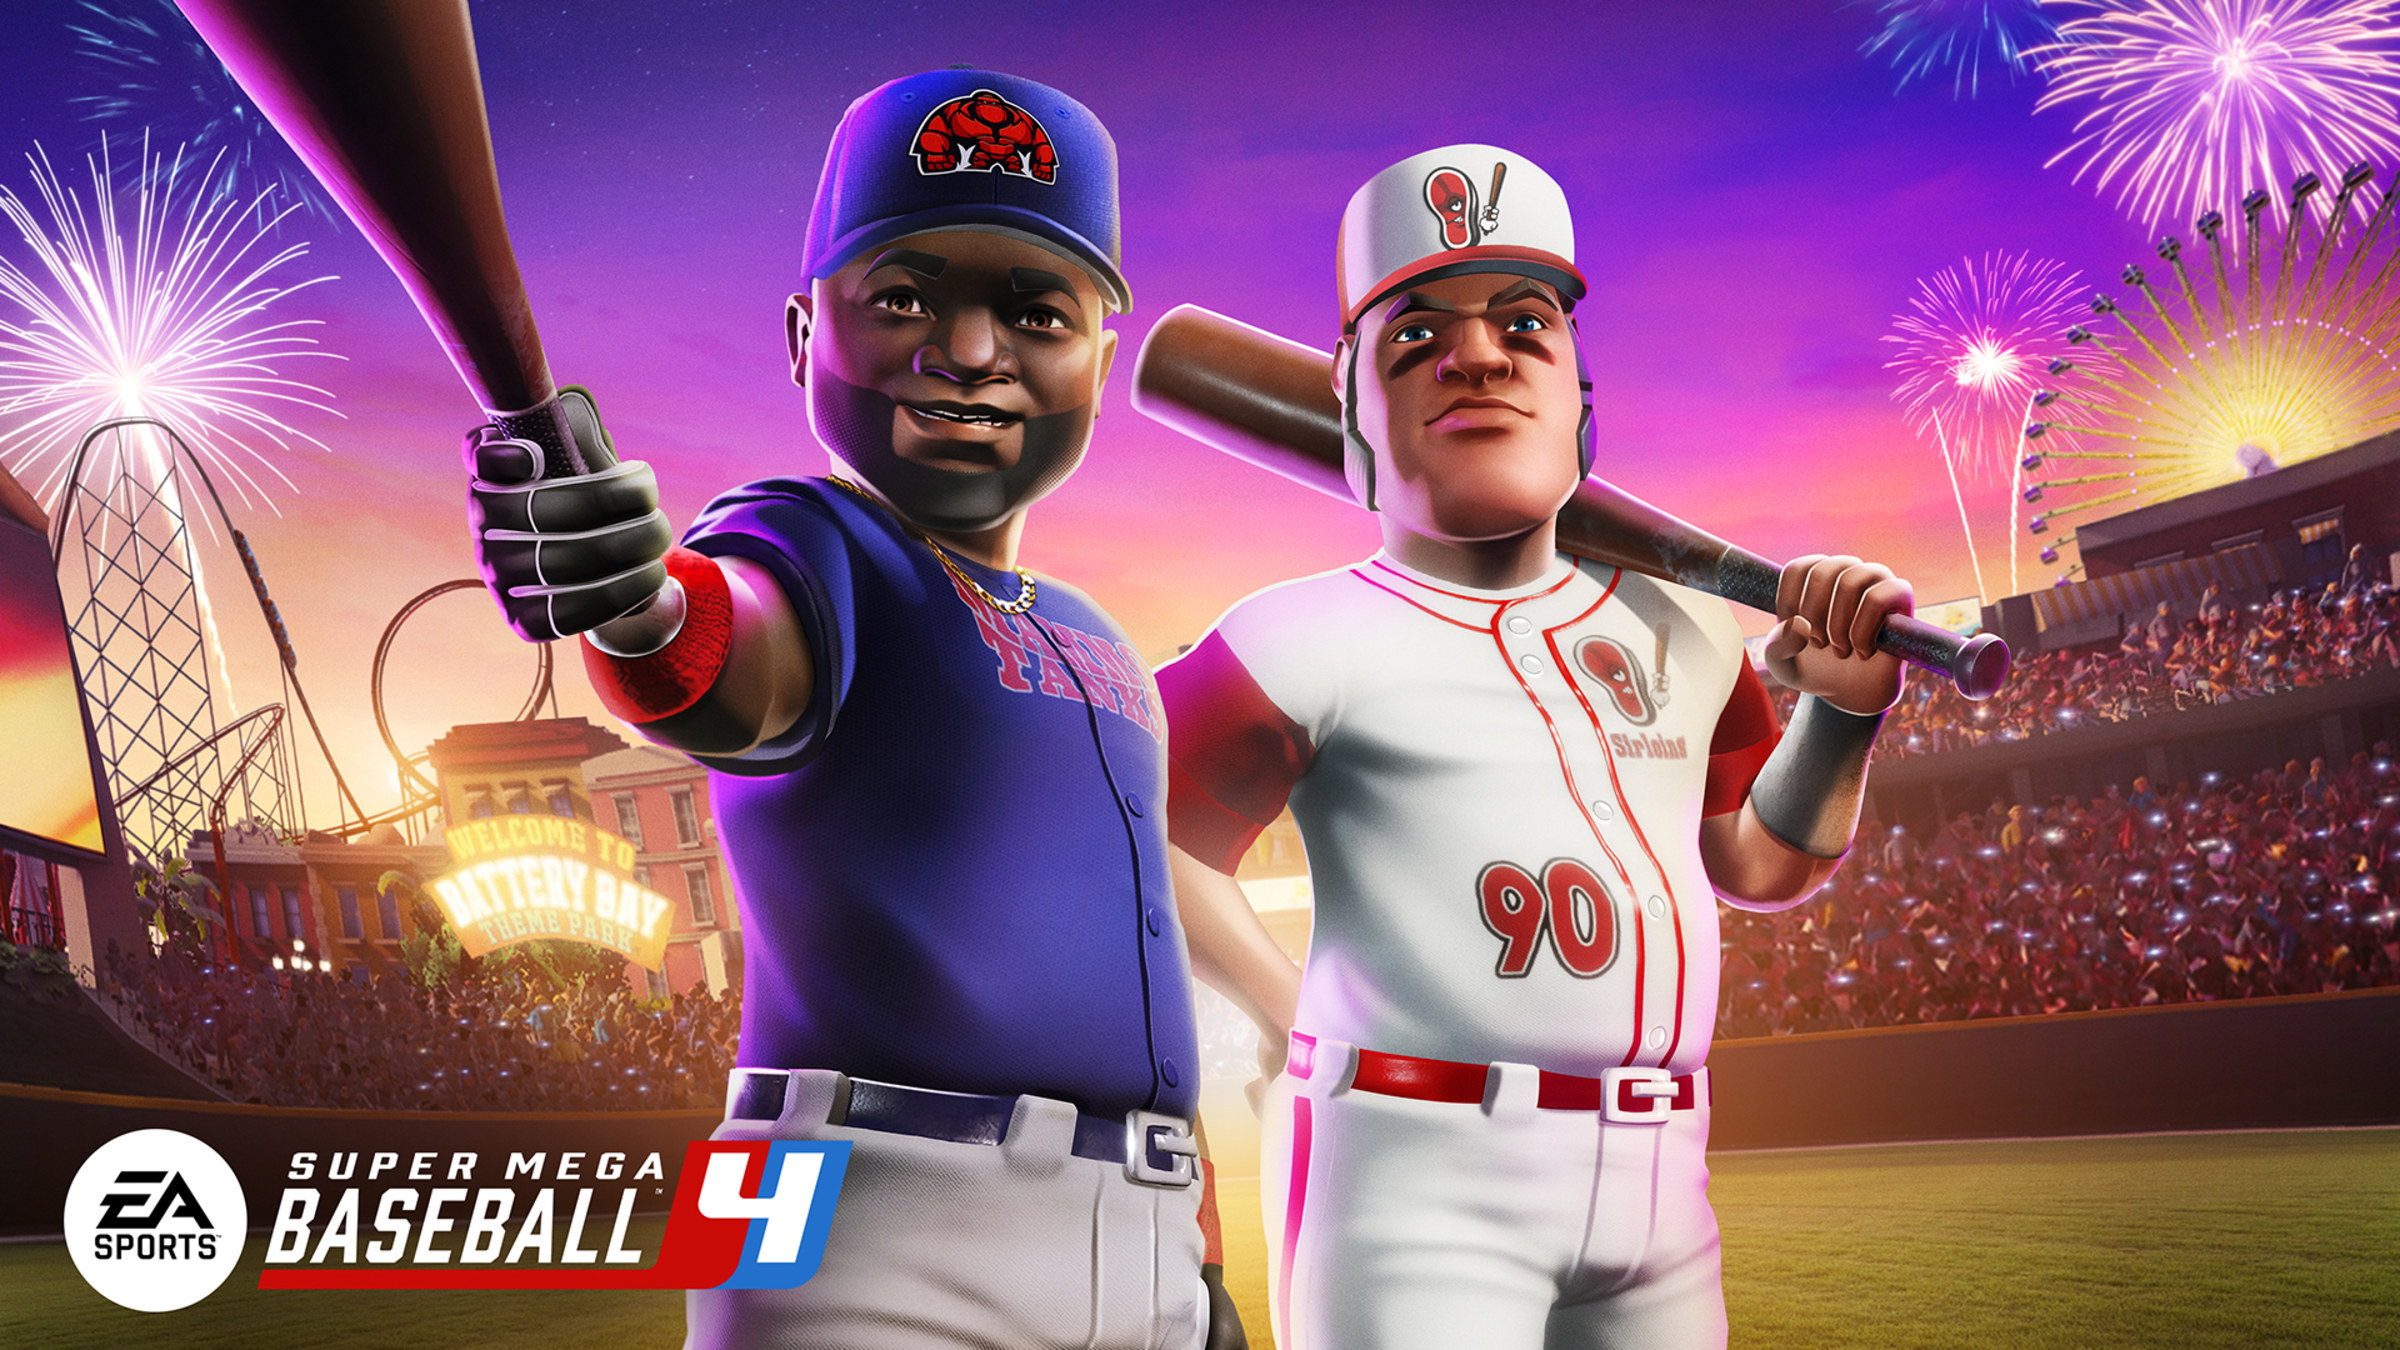 Baseballer - What are your thoughts on the uniforms for